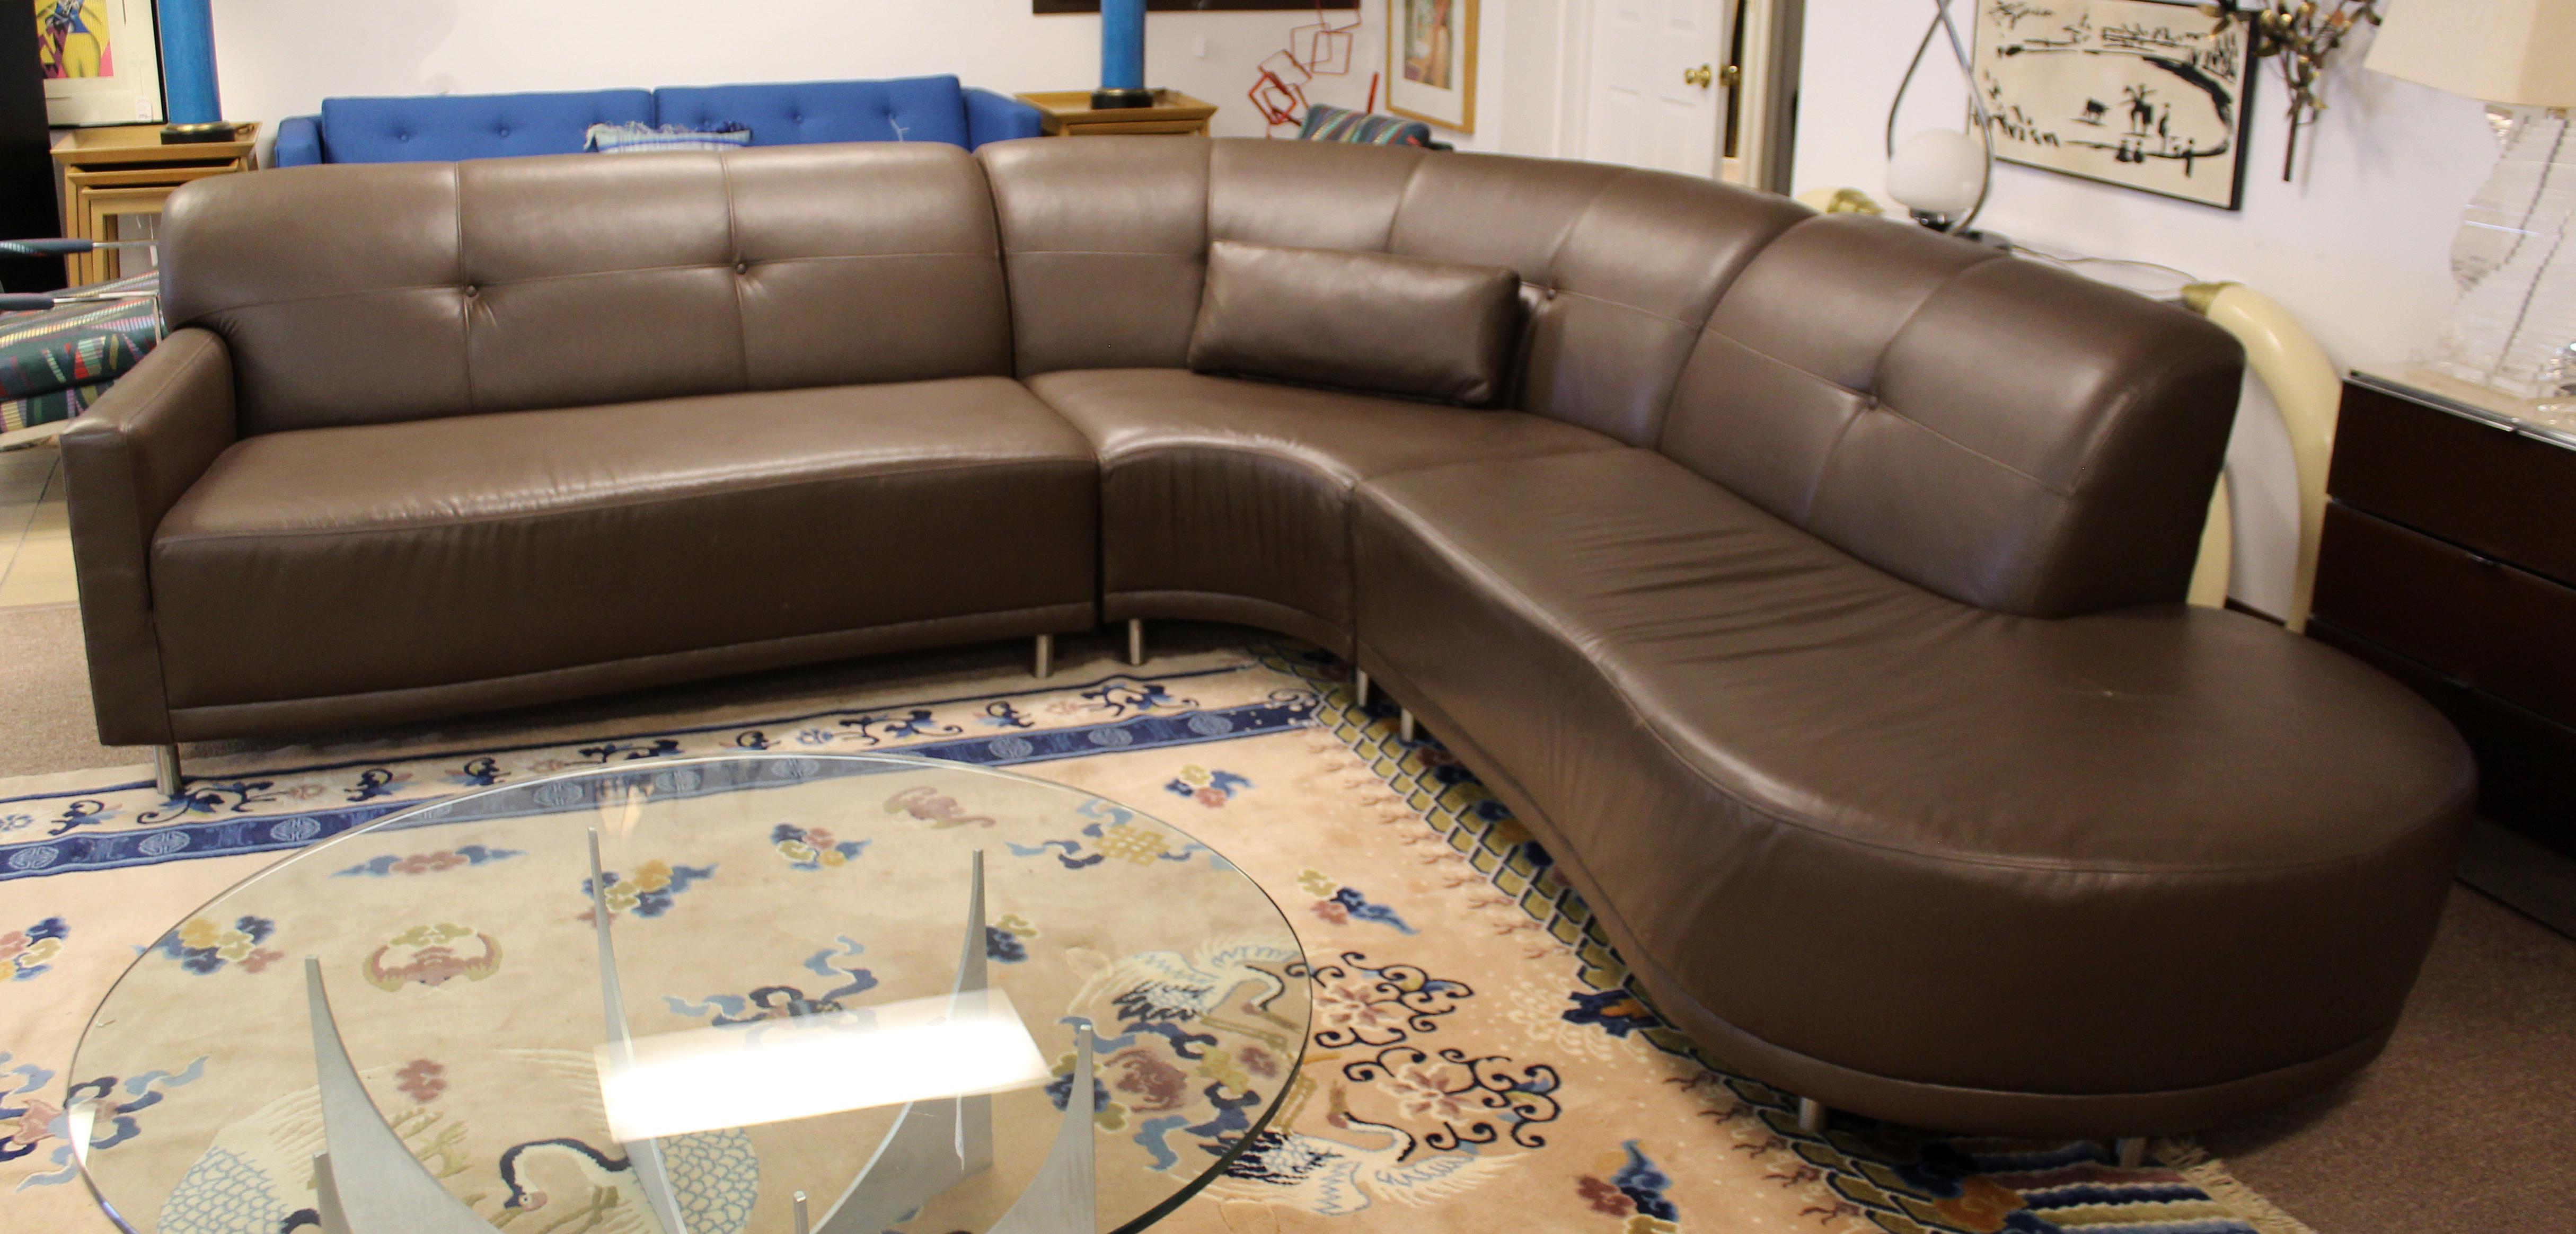 For your consideration is a phenomenal, three piece, curved sectional sofa, with a creamy brown leather upholstery that feels like butter, by Carsons, circa 2004. In excellent condition. The dimensions of each piece are 58